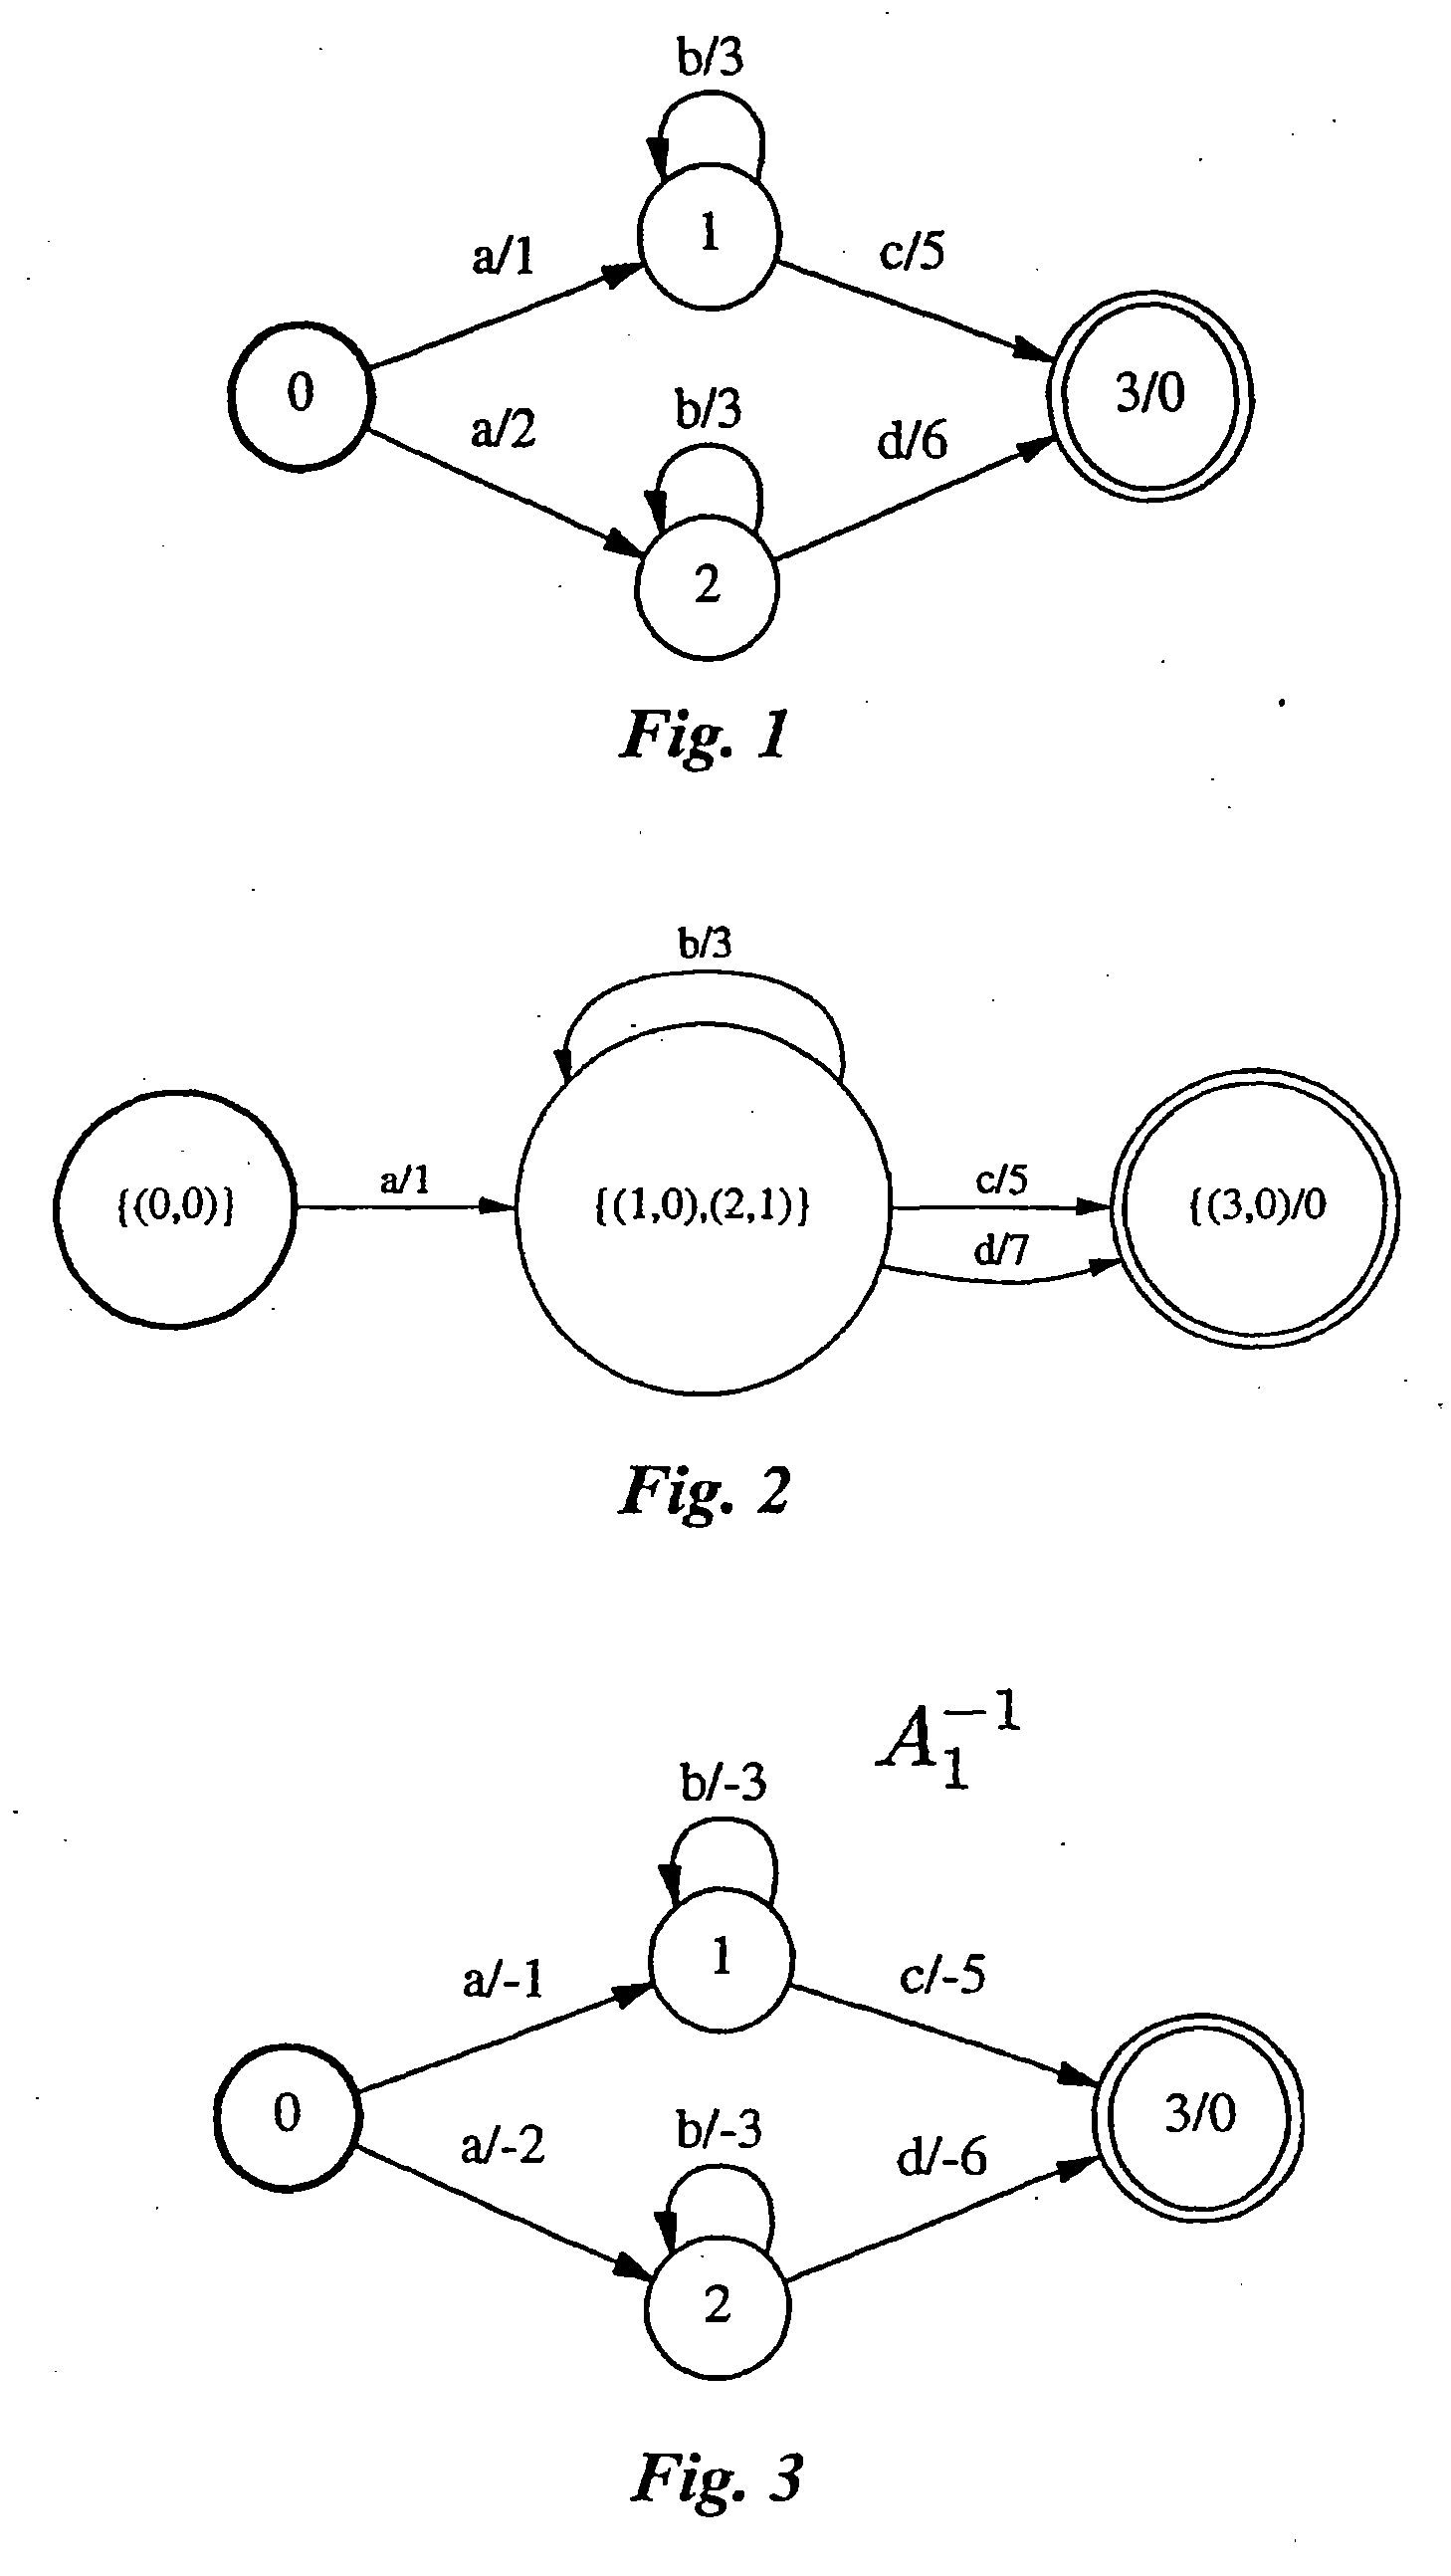 Systems and methods for determining the determinizability of finite-state automata and transducers